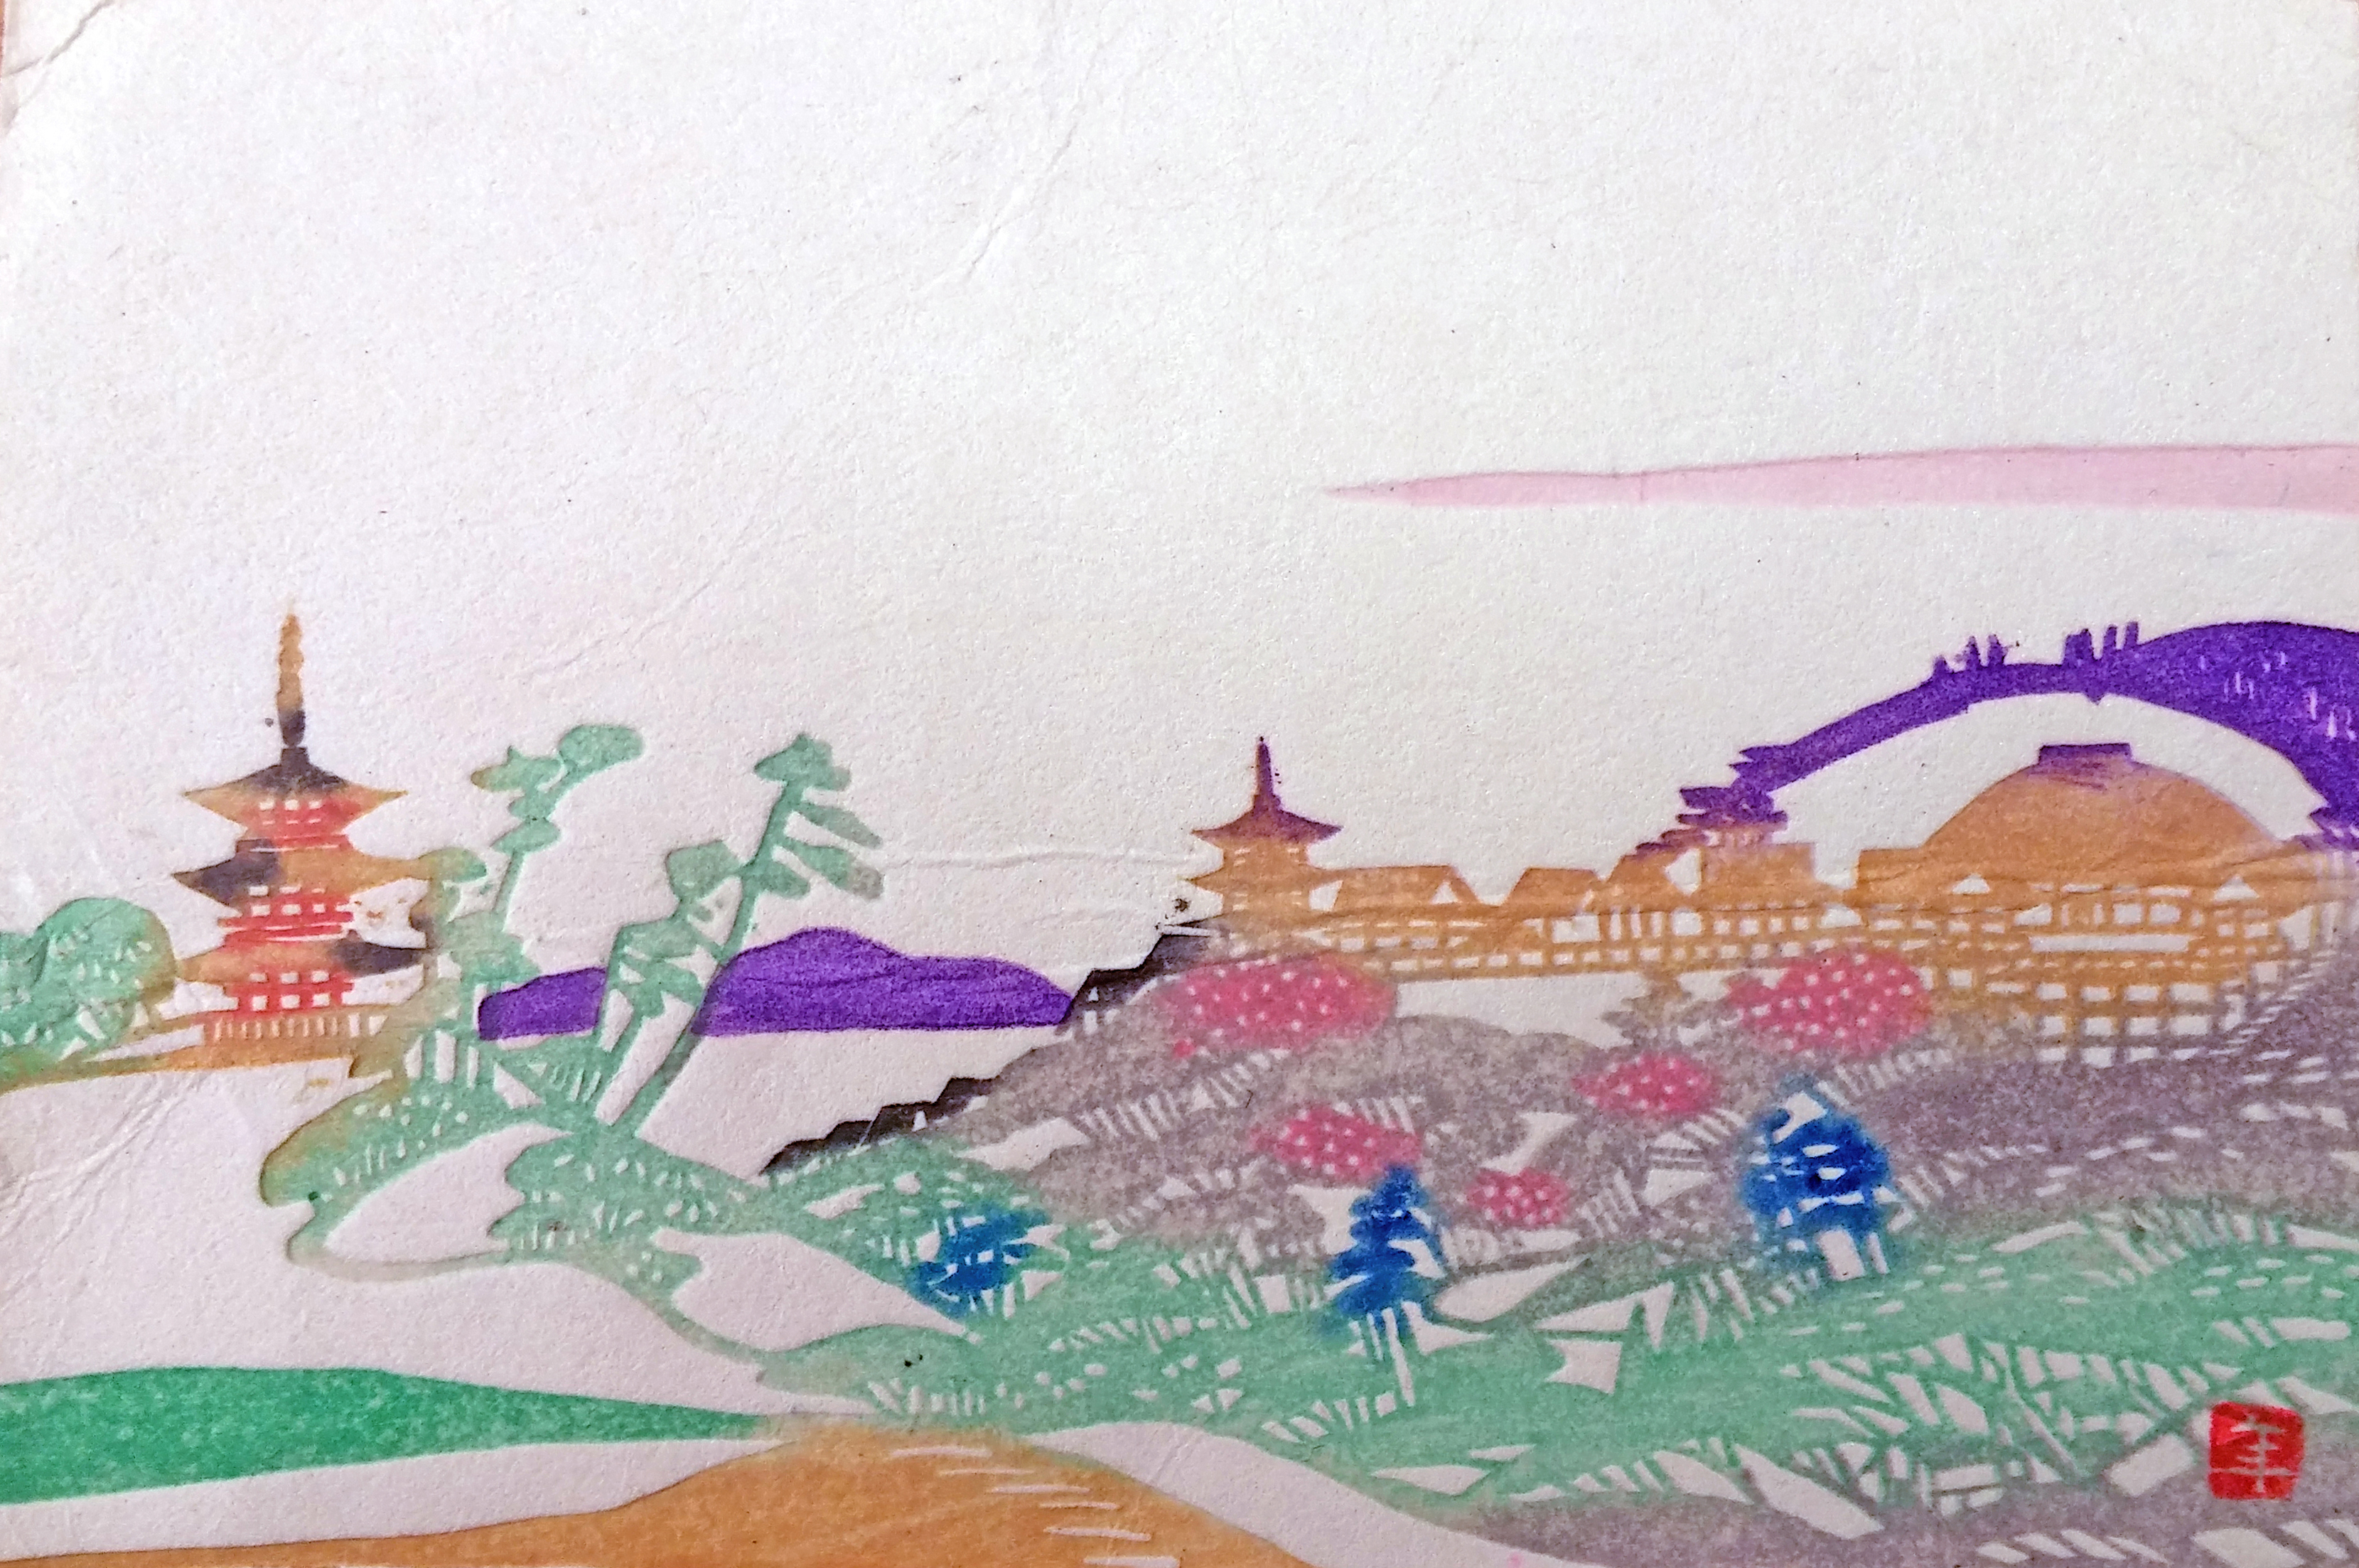 Watercolor found in the Toyoaki Uehara papers at the IU Archives